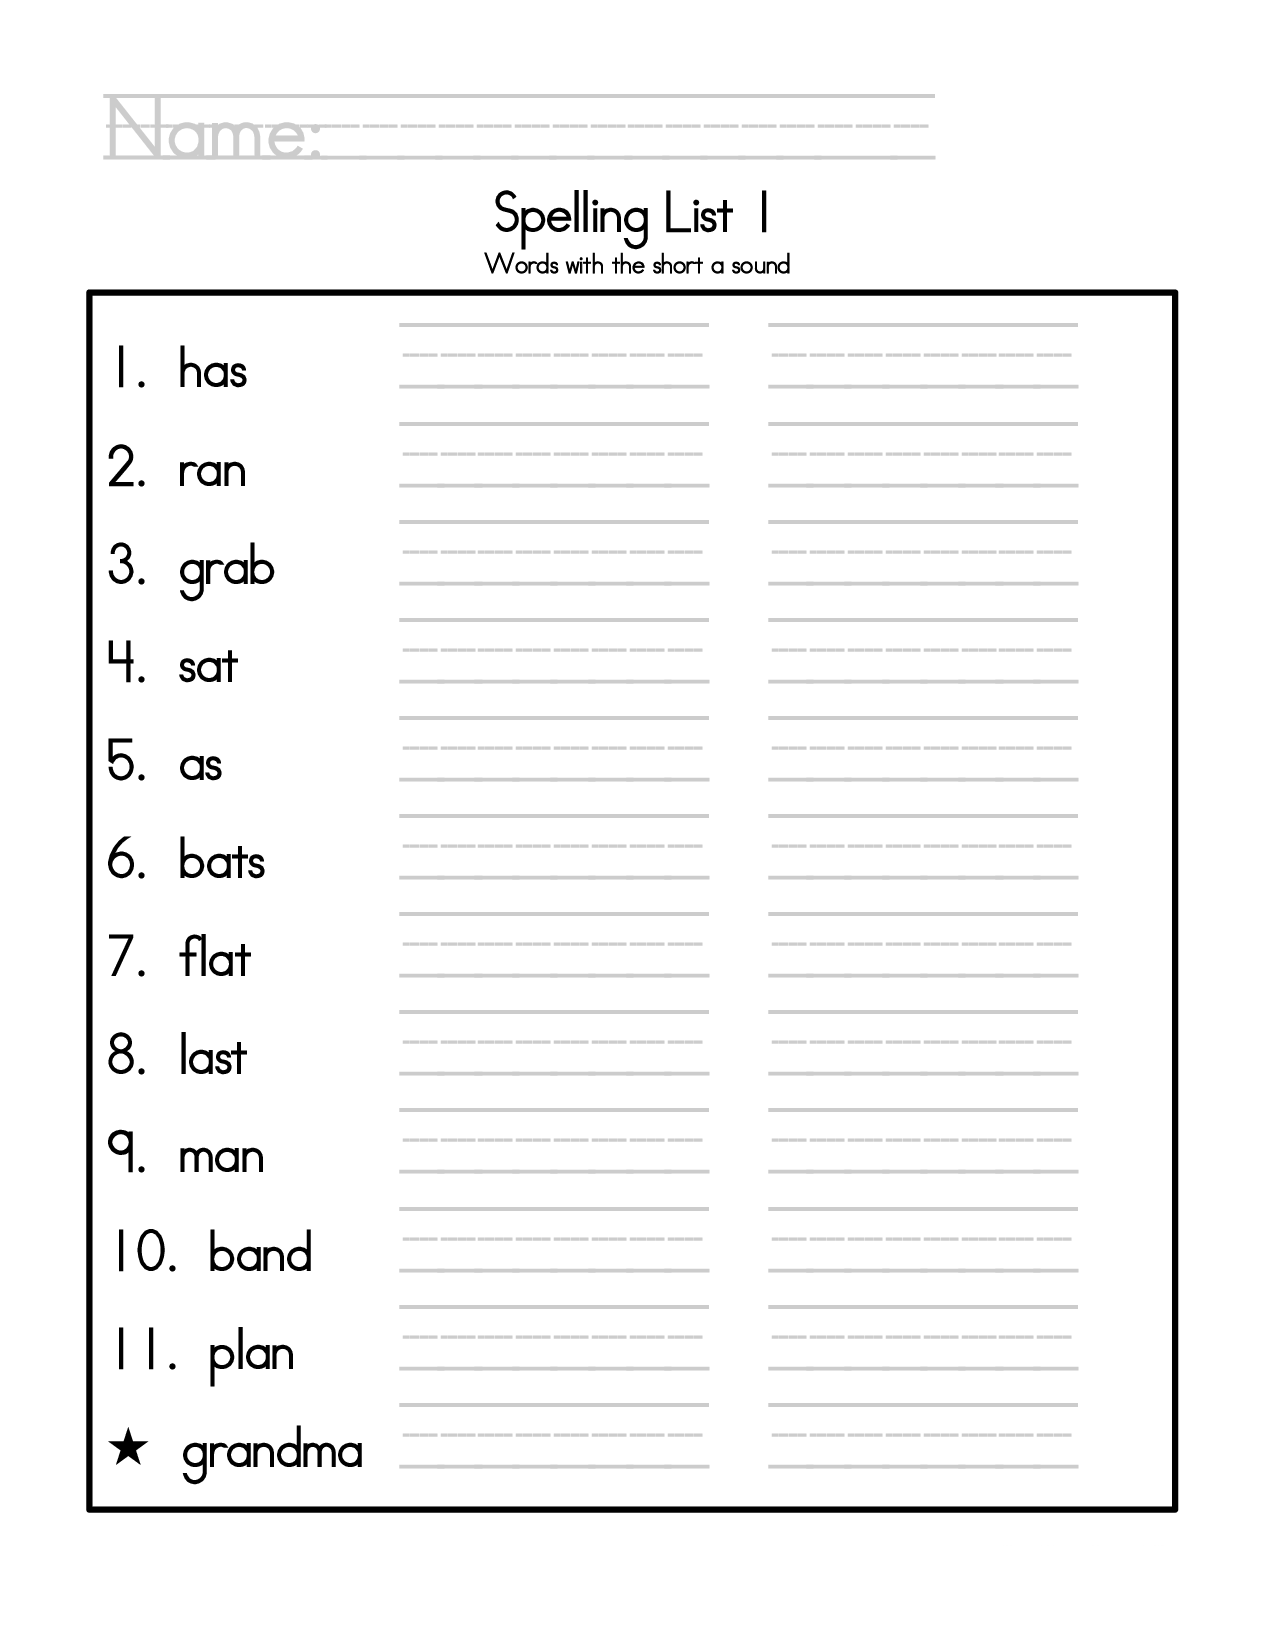 2nd-grade-spelling-worksheets-best-coloring-pages-for-kids